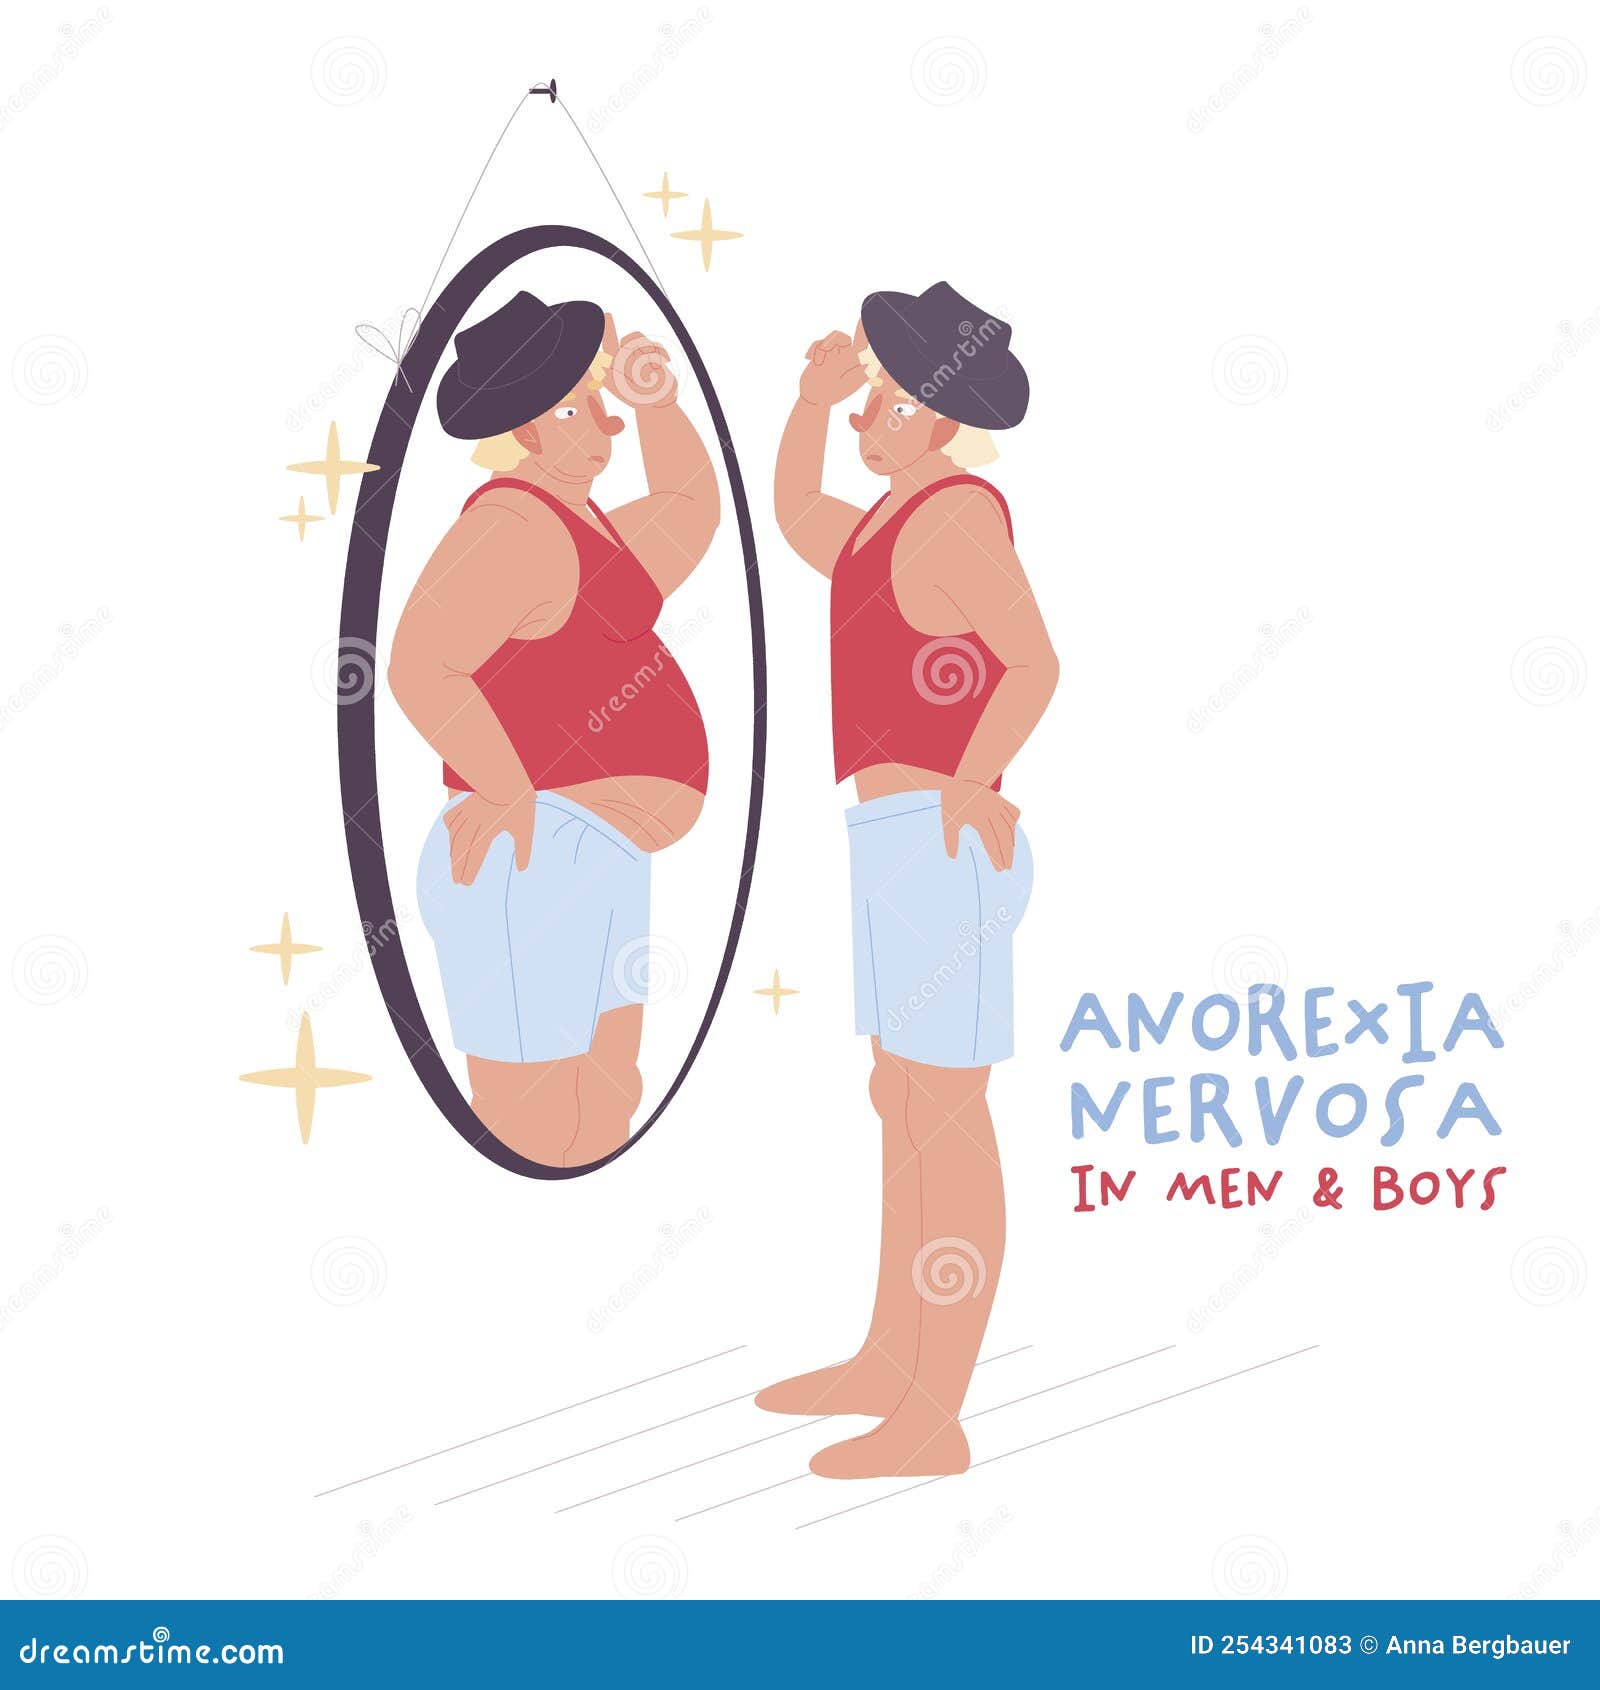 eating disorder in men and boys. anorexia nervosa.